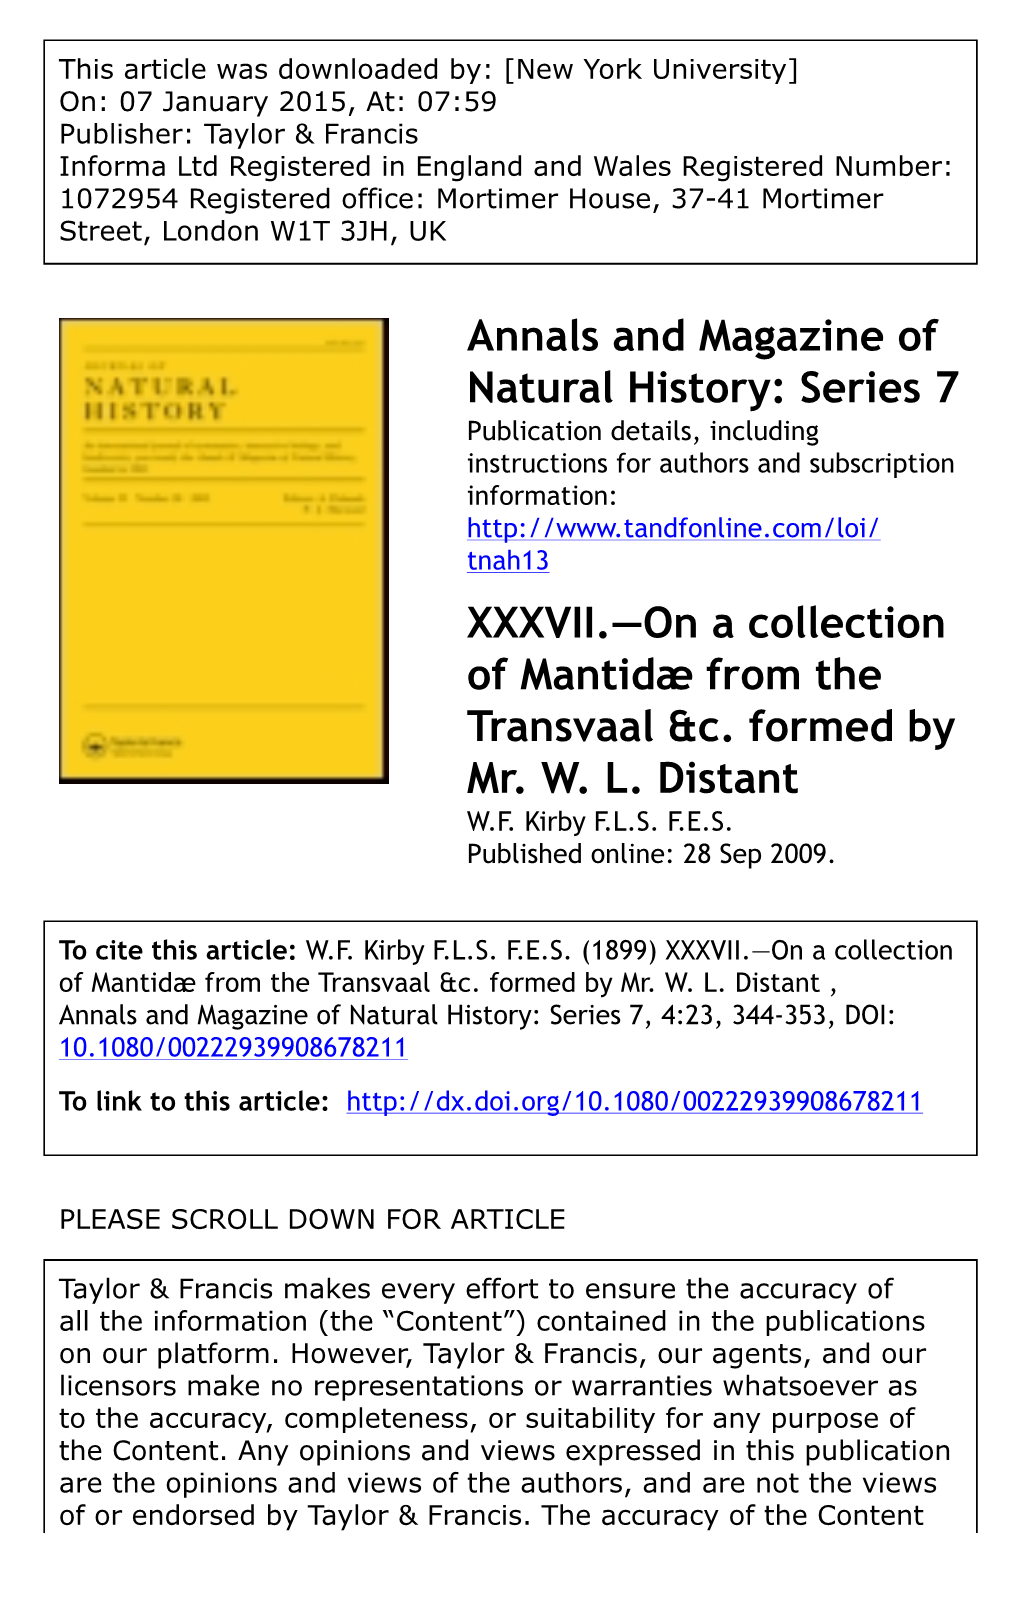 Series 7 XXXVII.—On a Collection of Mantidæ from The